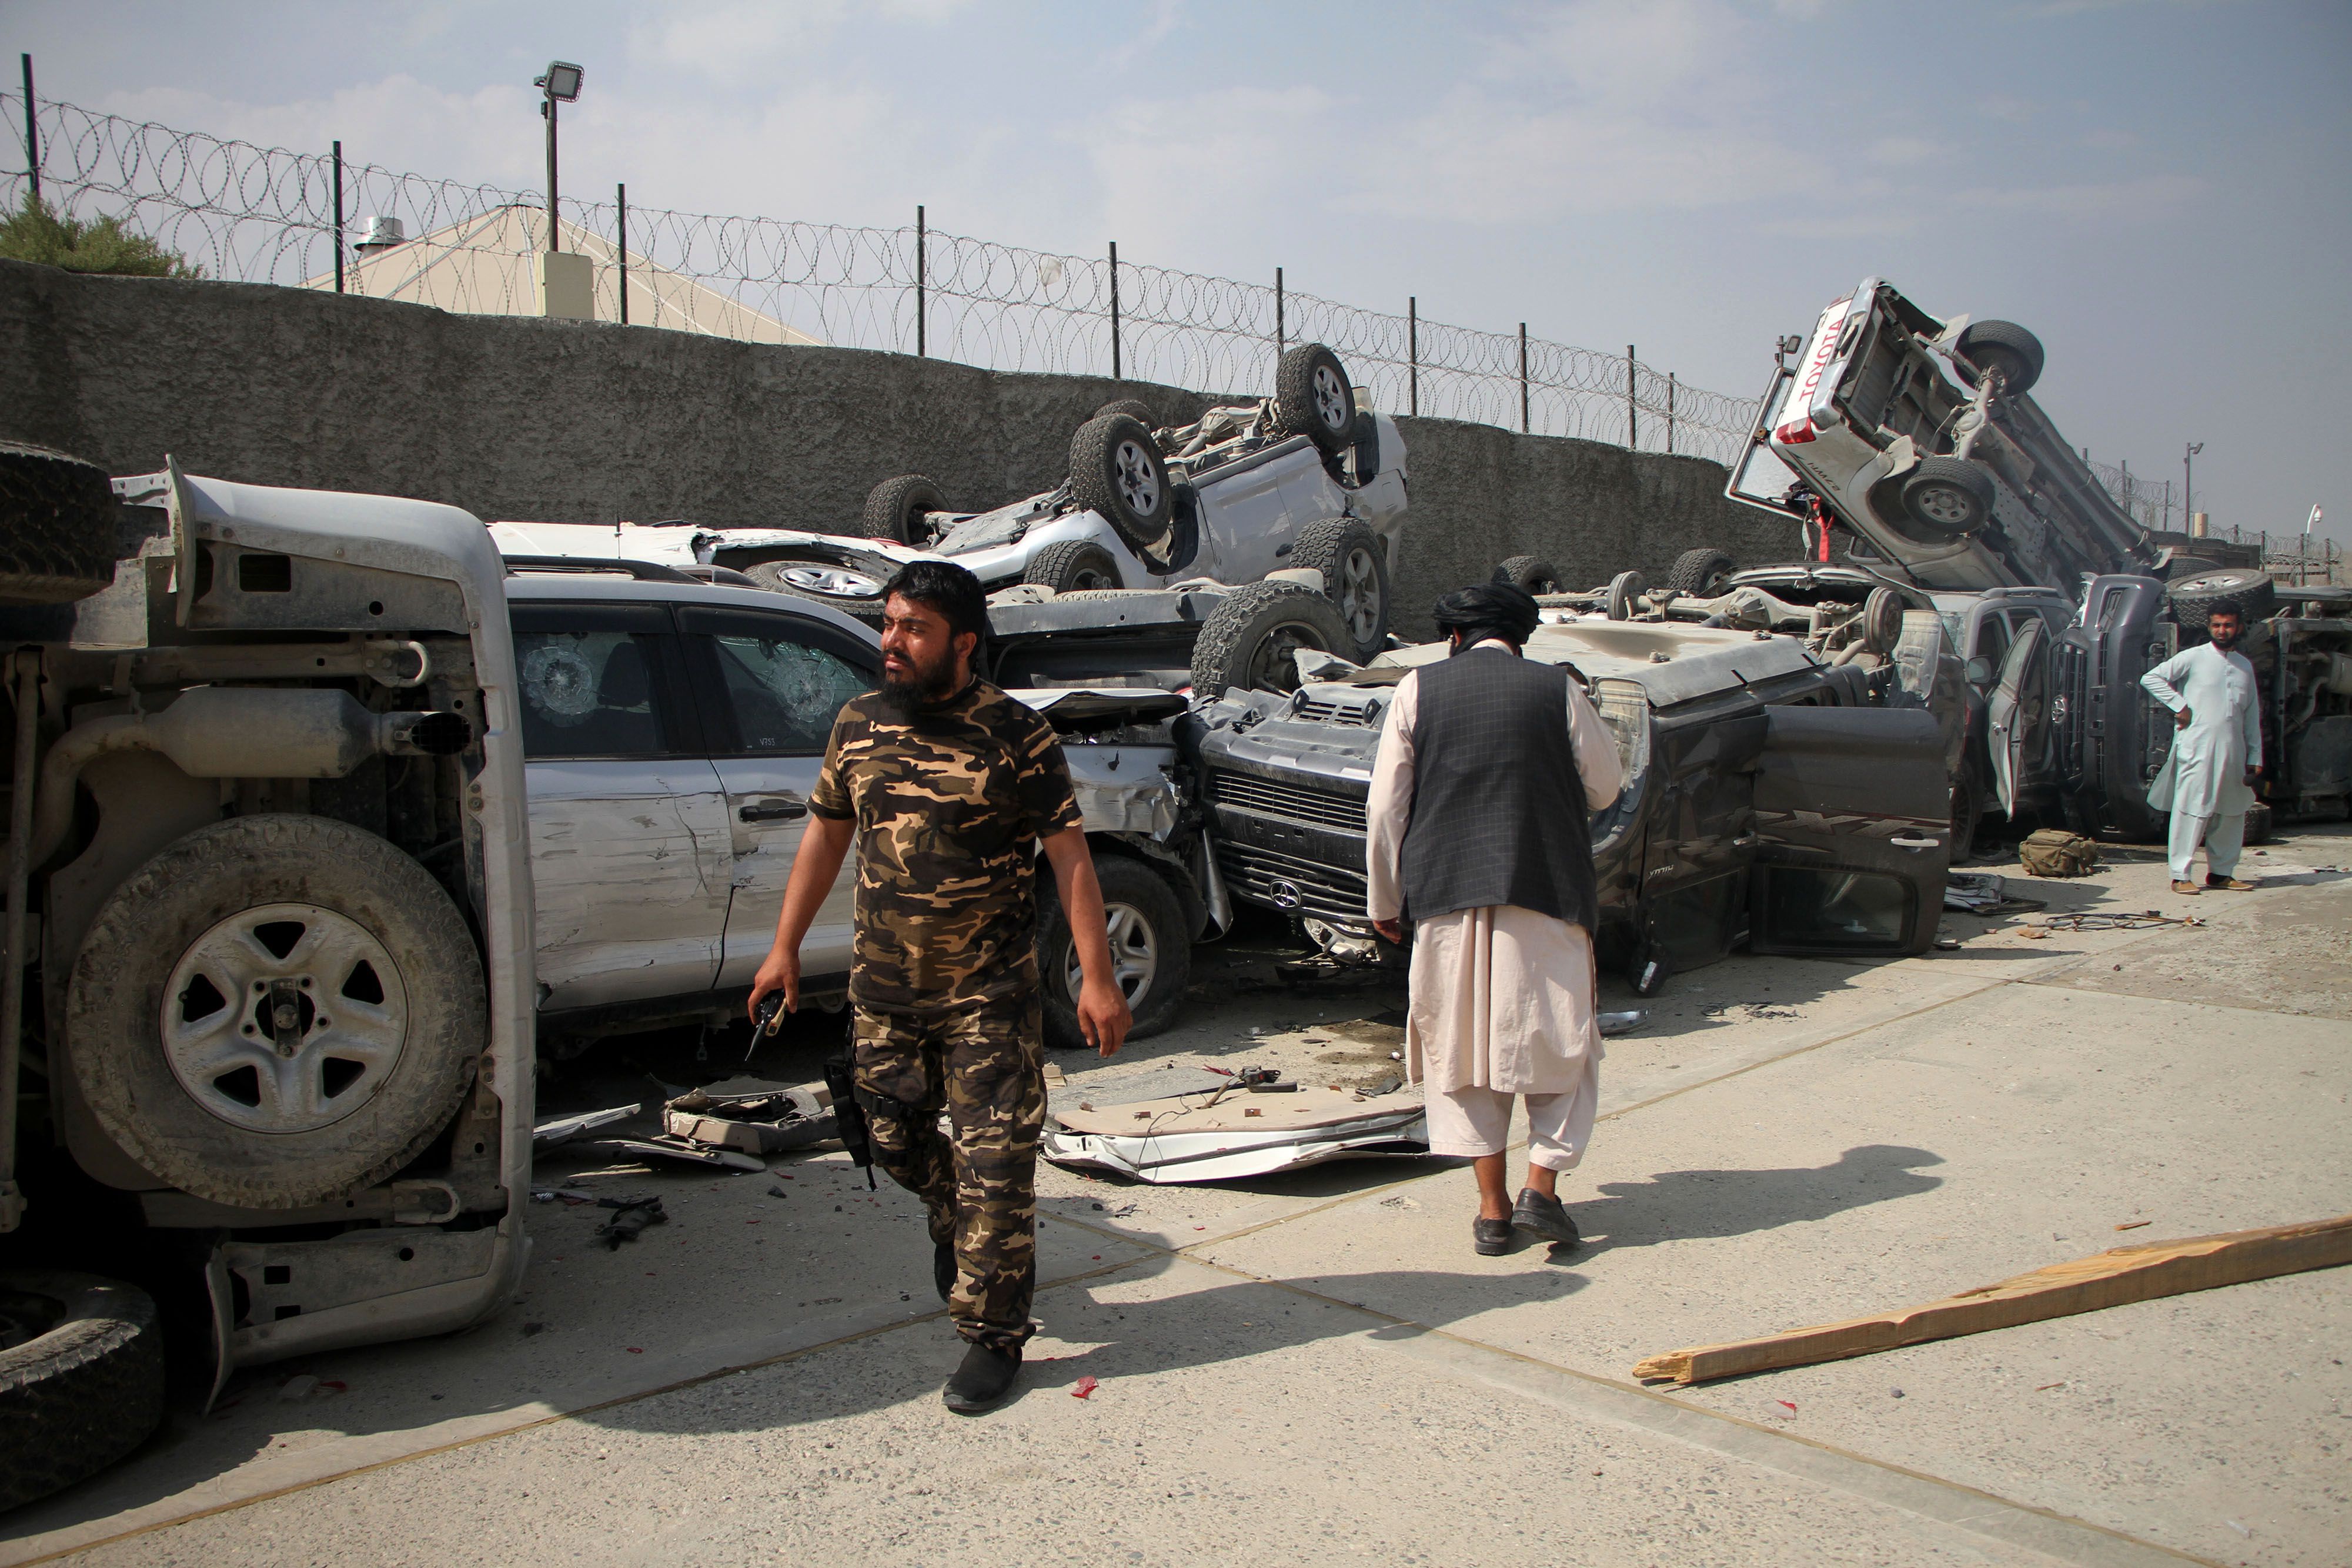 20-09-2021 (210921) -- KABUL, Sept. 21, 2021 (Xinhua) -- Taliban members walk past damaged vehicles at the Kabul airport in Kabul, capital of Afghanistan, Sept. 20, 2021. The Kabul airport were damaged with its many facilities destroyed during the withdrawal of the last U.S.-led forces and U.S.-led evacuation flights in late August, according to airport director Abdul Hadi Hamadani on Monday. POLITICA Europa Press/Contacto/Saifurahman Safi 